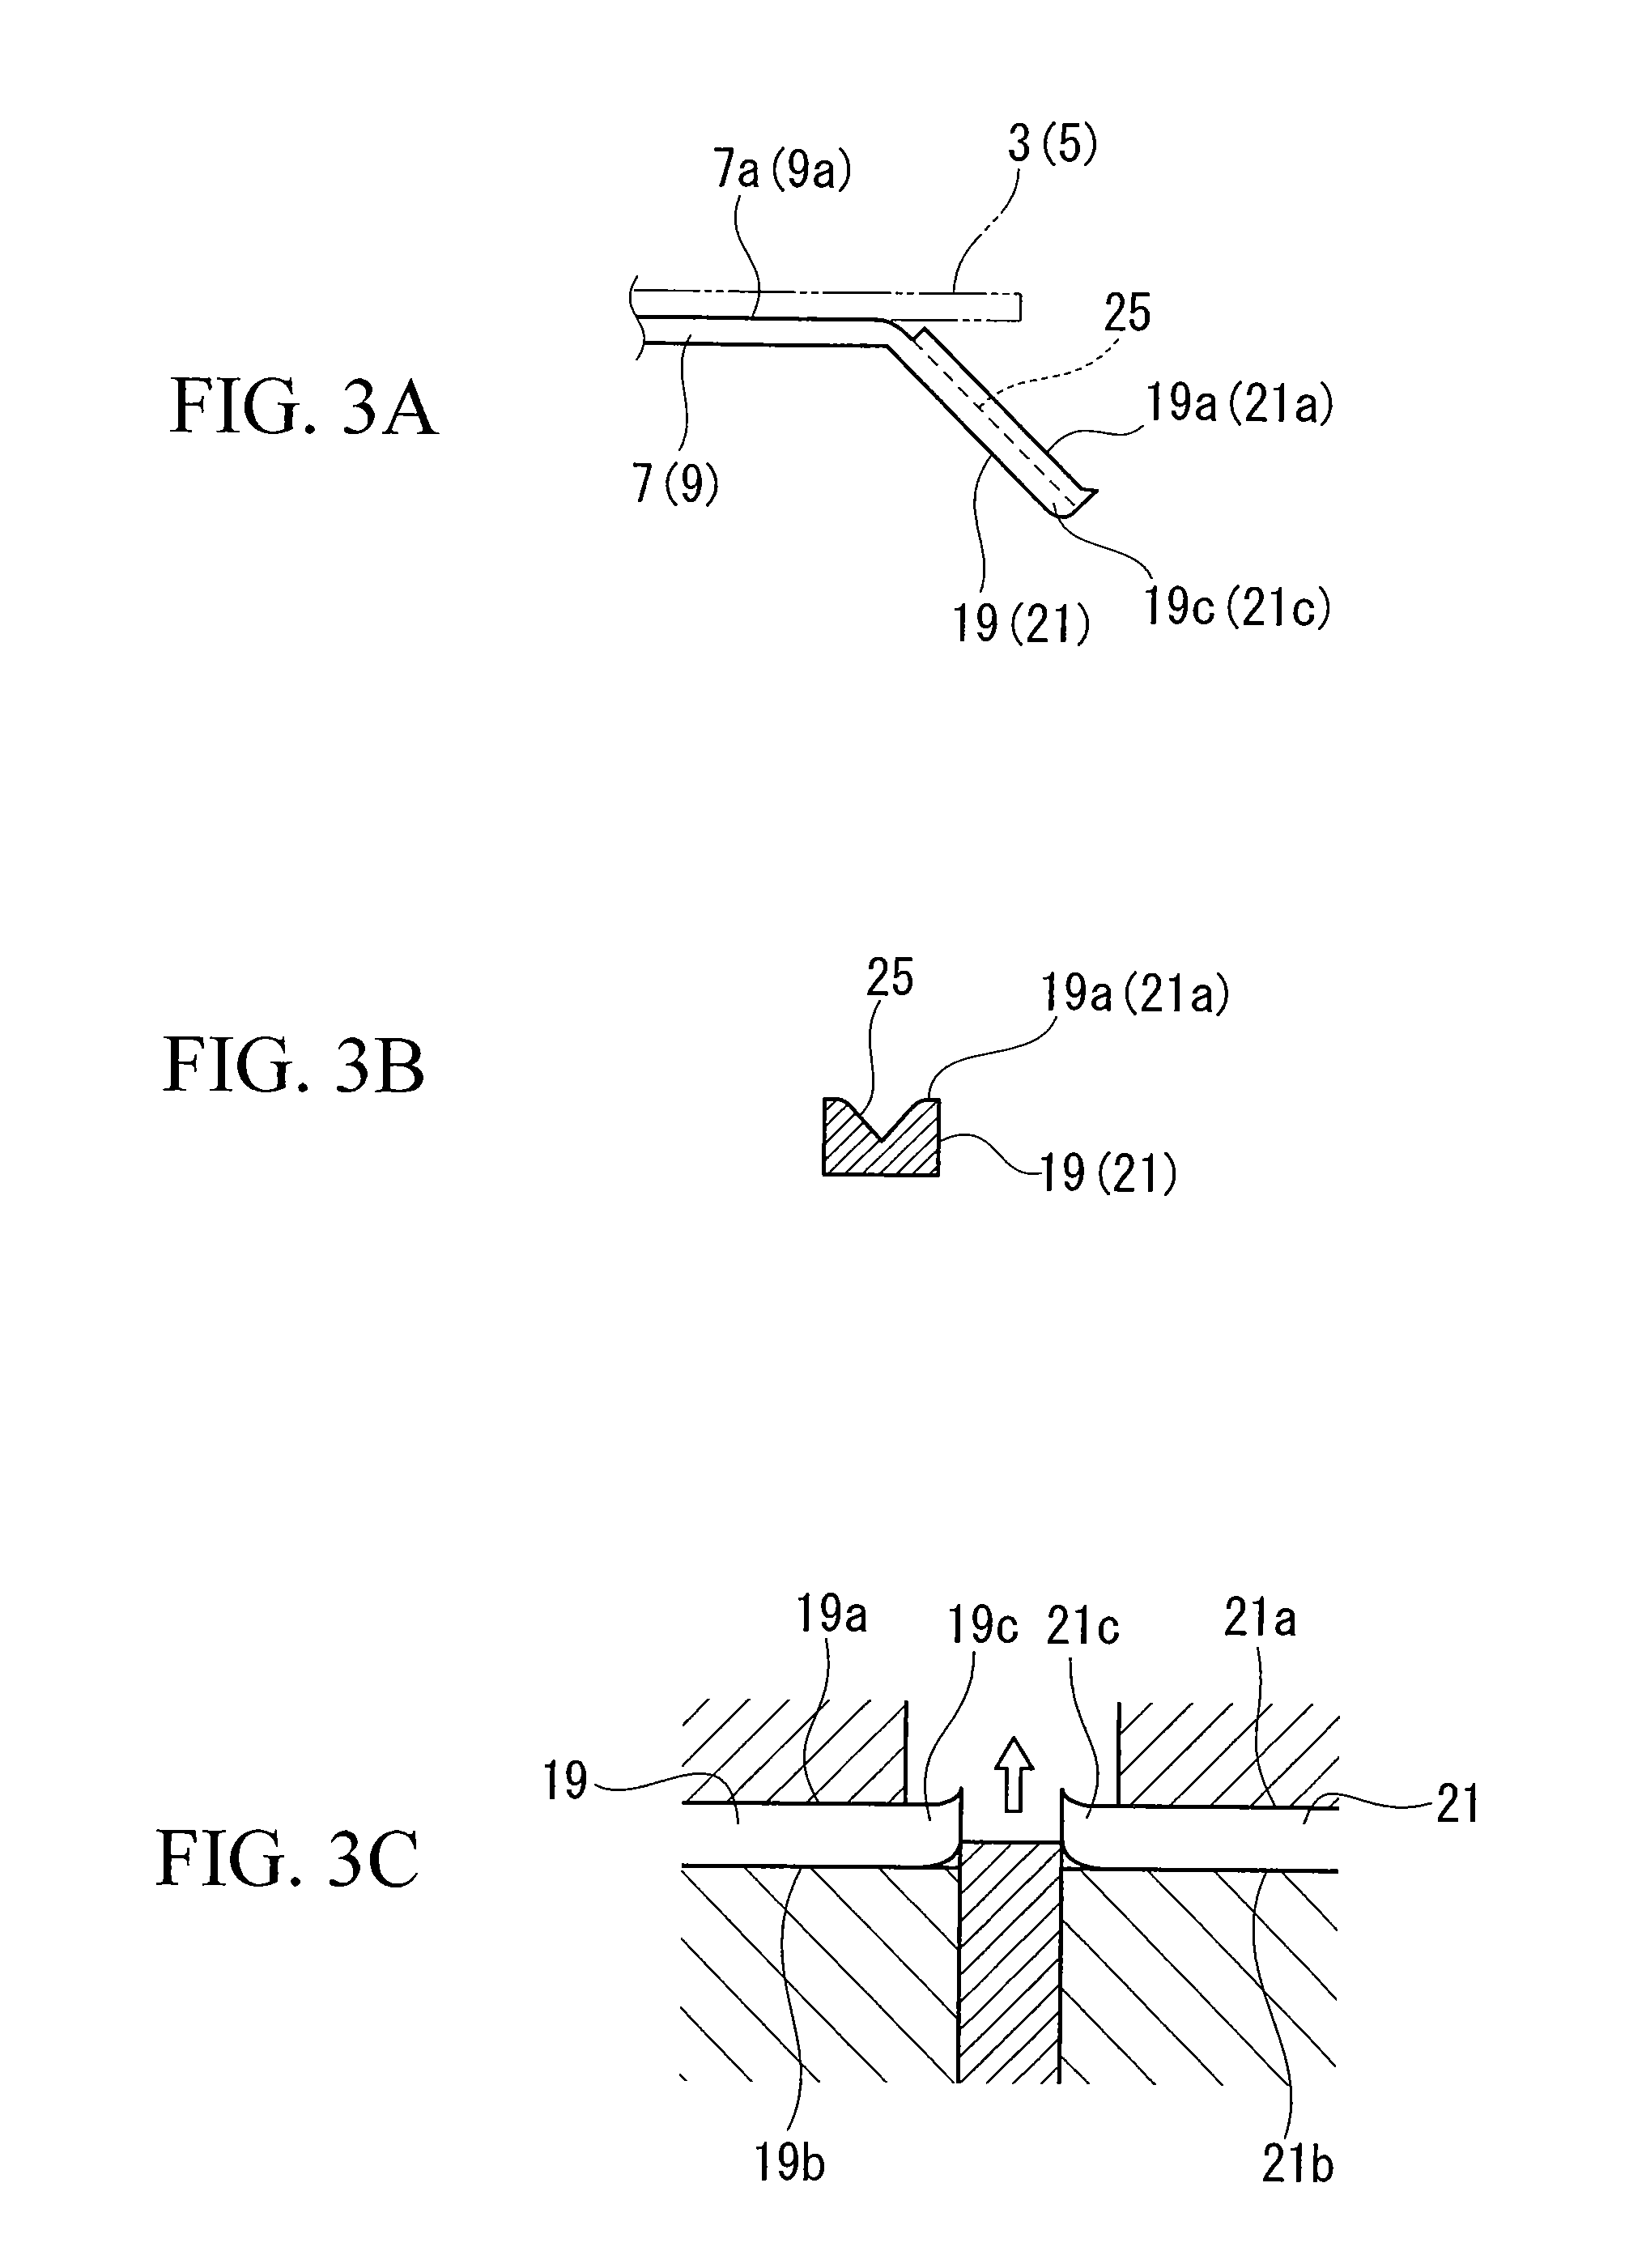 Physical Quantity Sensor and Lead Frame Used for Same